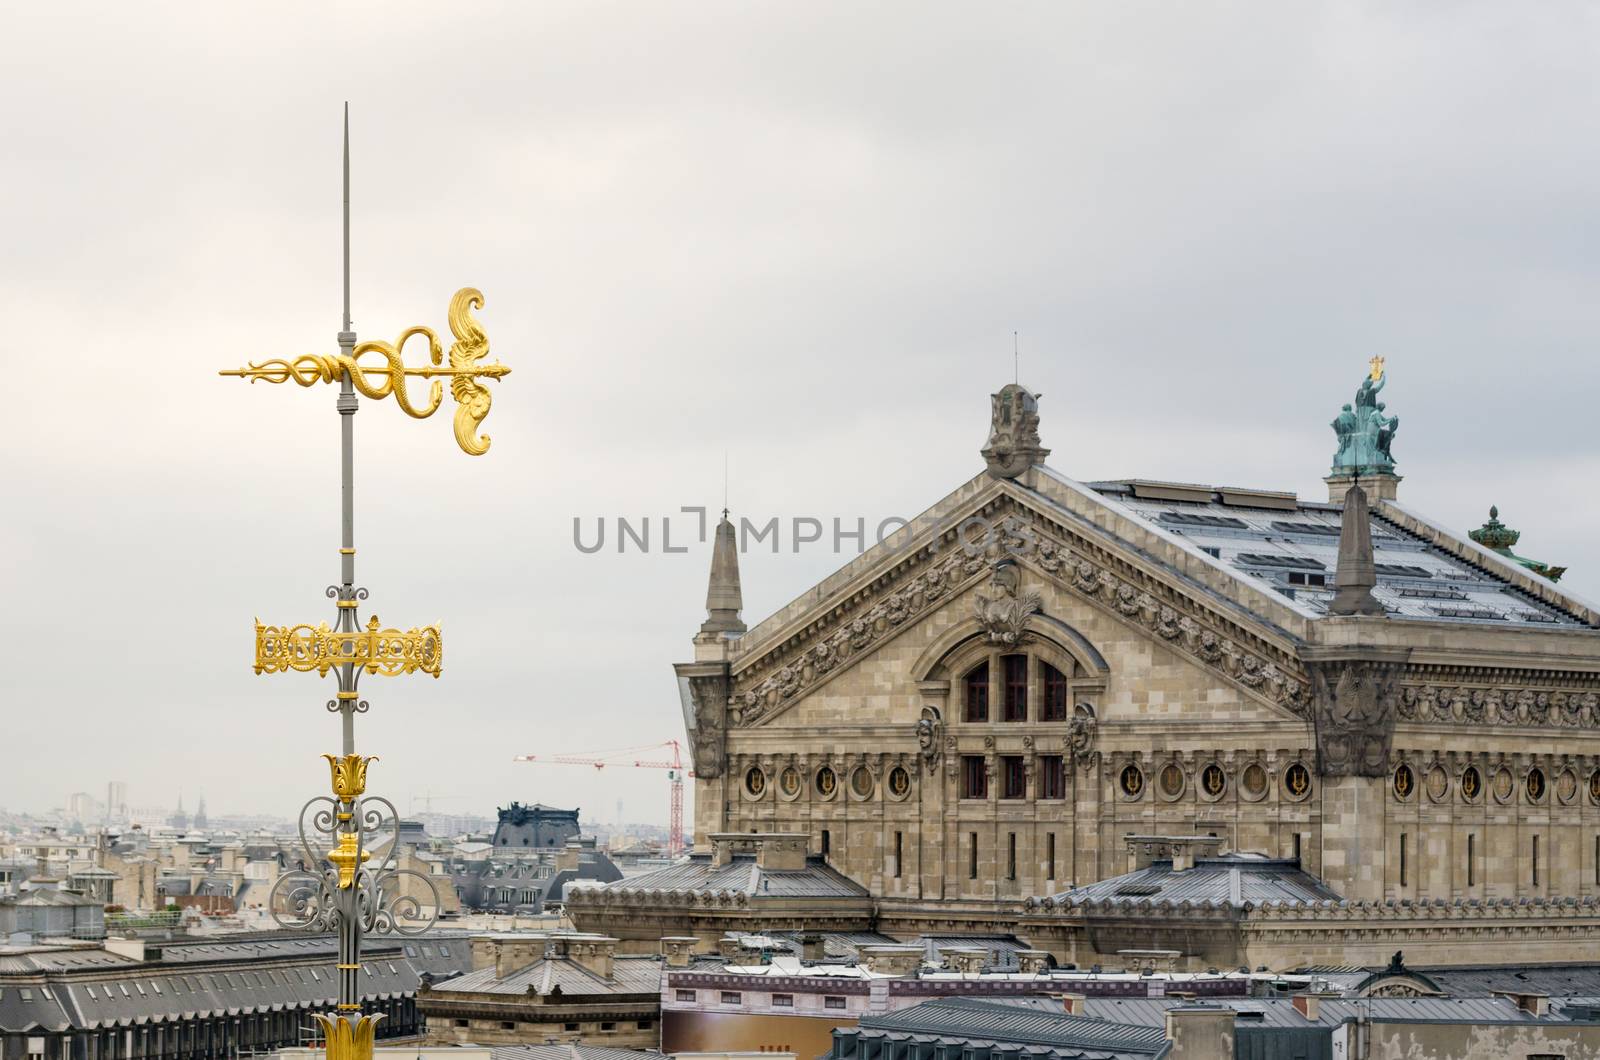 Snakes and arrow Roof Decorated with Opera House (Palais Garnier) in Paris by siraanamwong